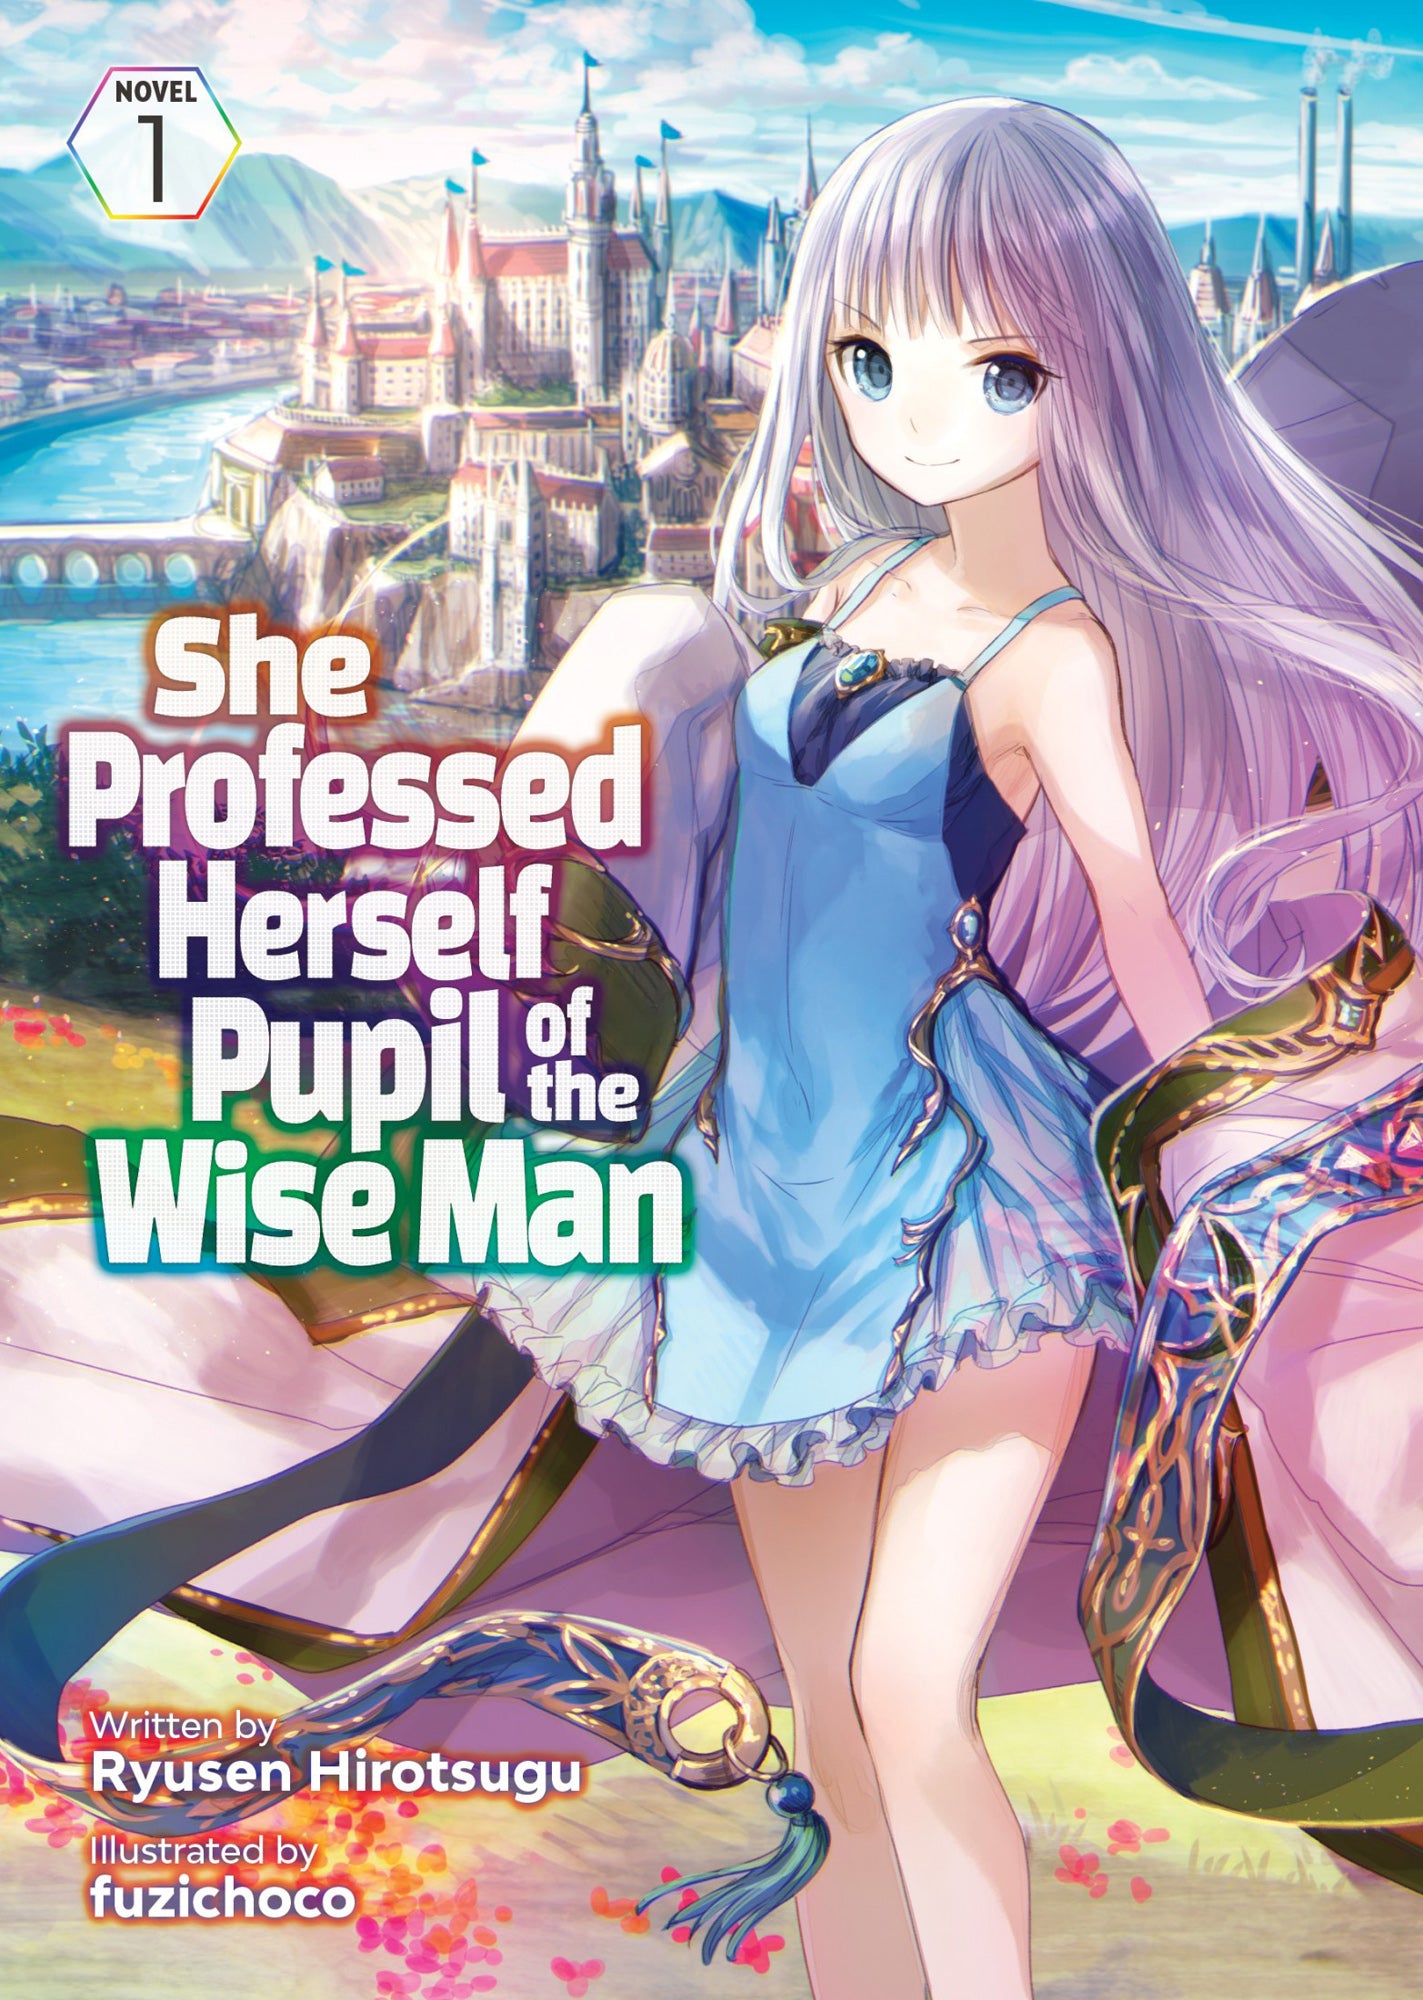 She Professed Herself Pupil of the Wise Man (Light Novel) Vol. 01